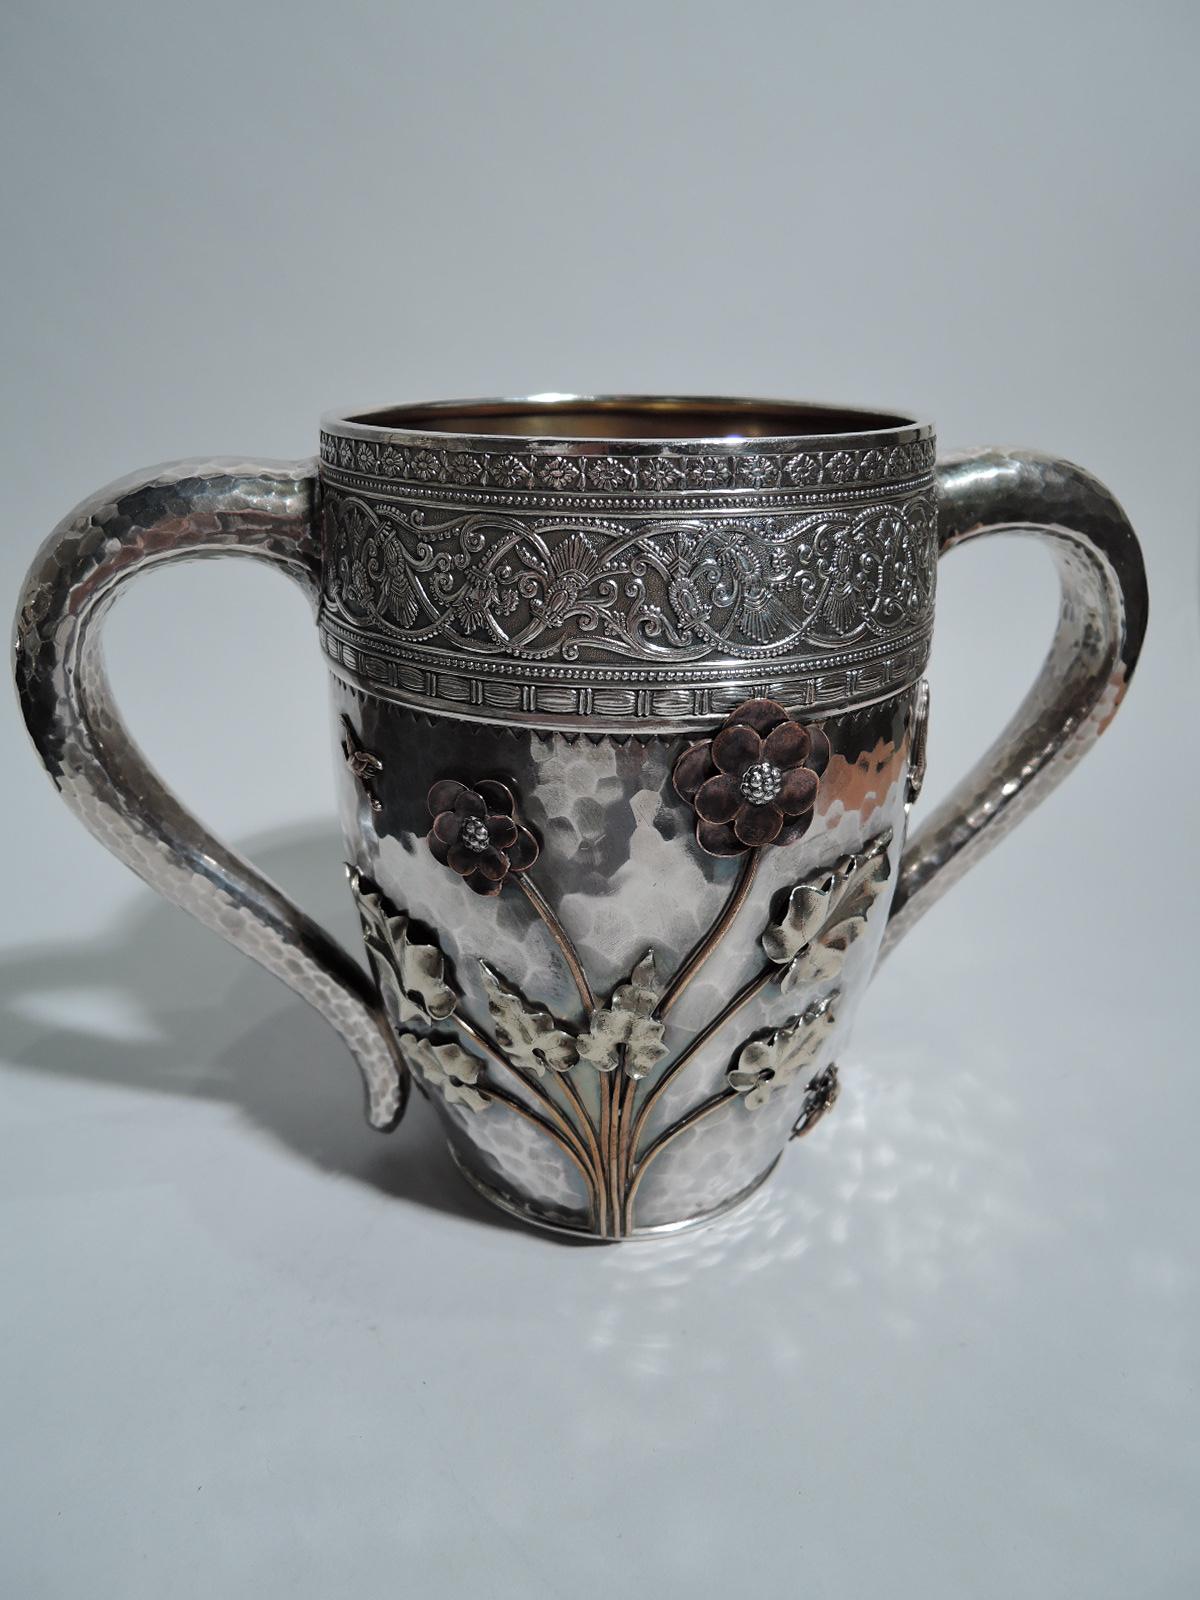 Japonesque sterling silver and mixed metal cup. Made by Gorham in Providence in 1882. Curved sides and s-scroll side handles. Allover honeycomb hand hammering. At top is wide band with stylized ornament: rinceaux between beaded, rosette, and